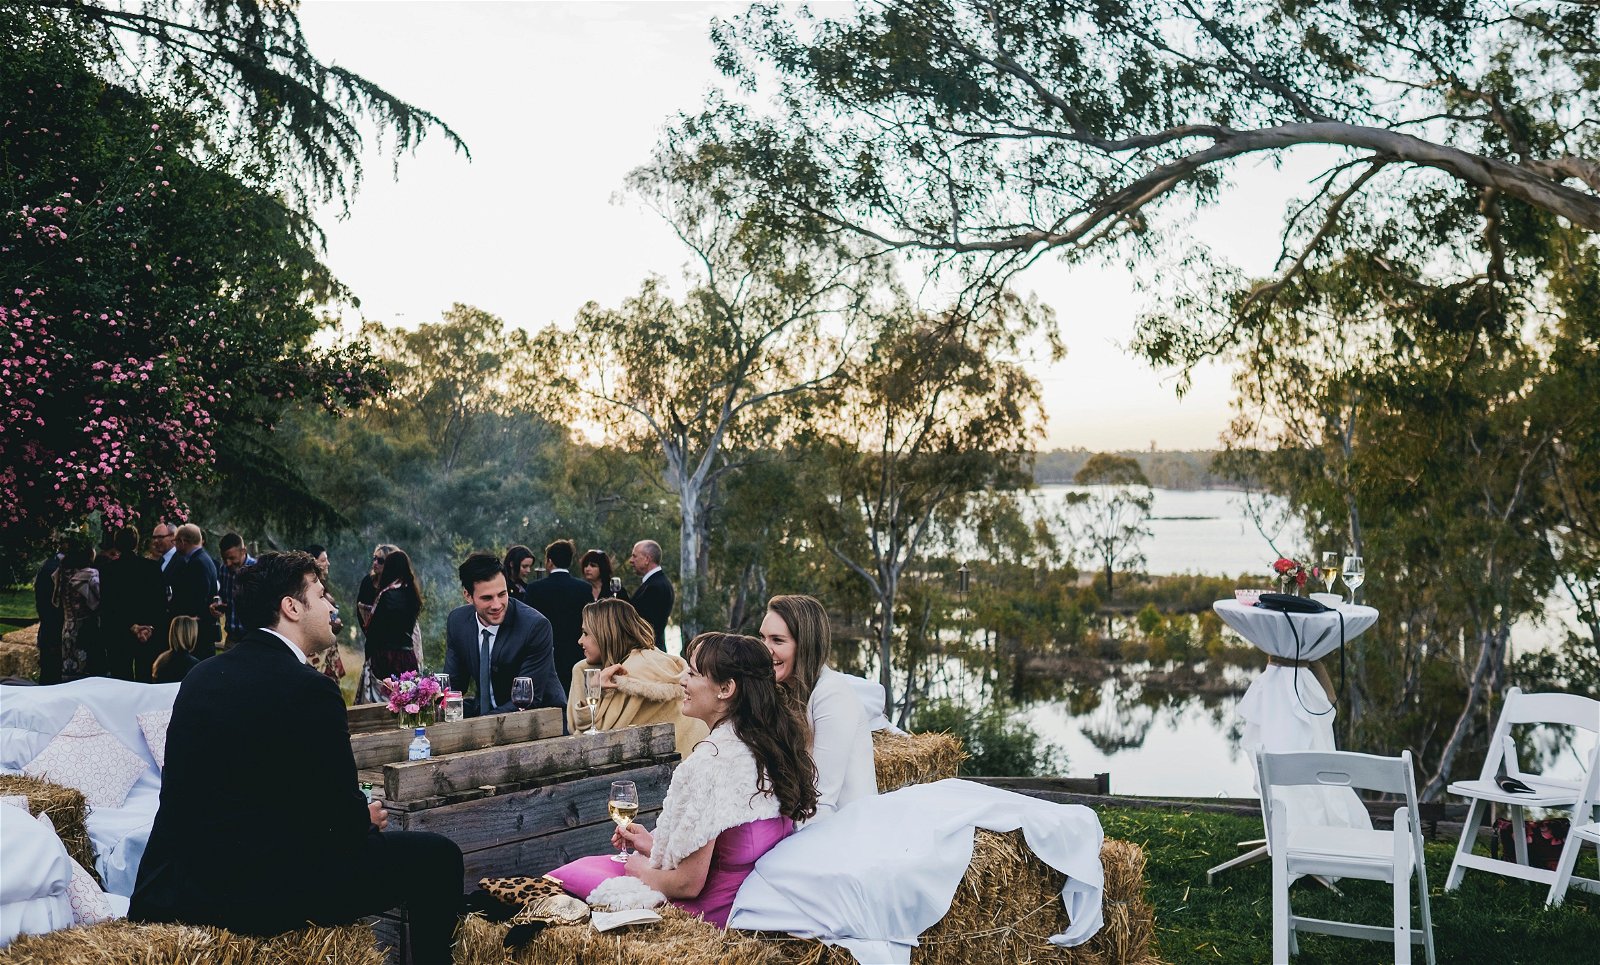 Lake Moodemere Estate and Lakeside Restaurant - Pubs Sydney